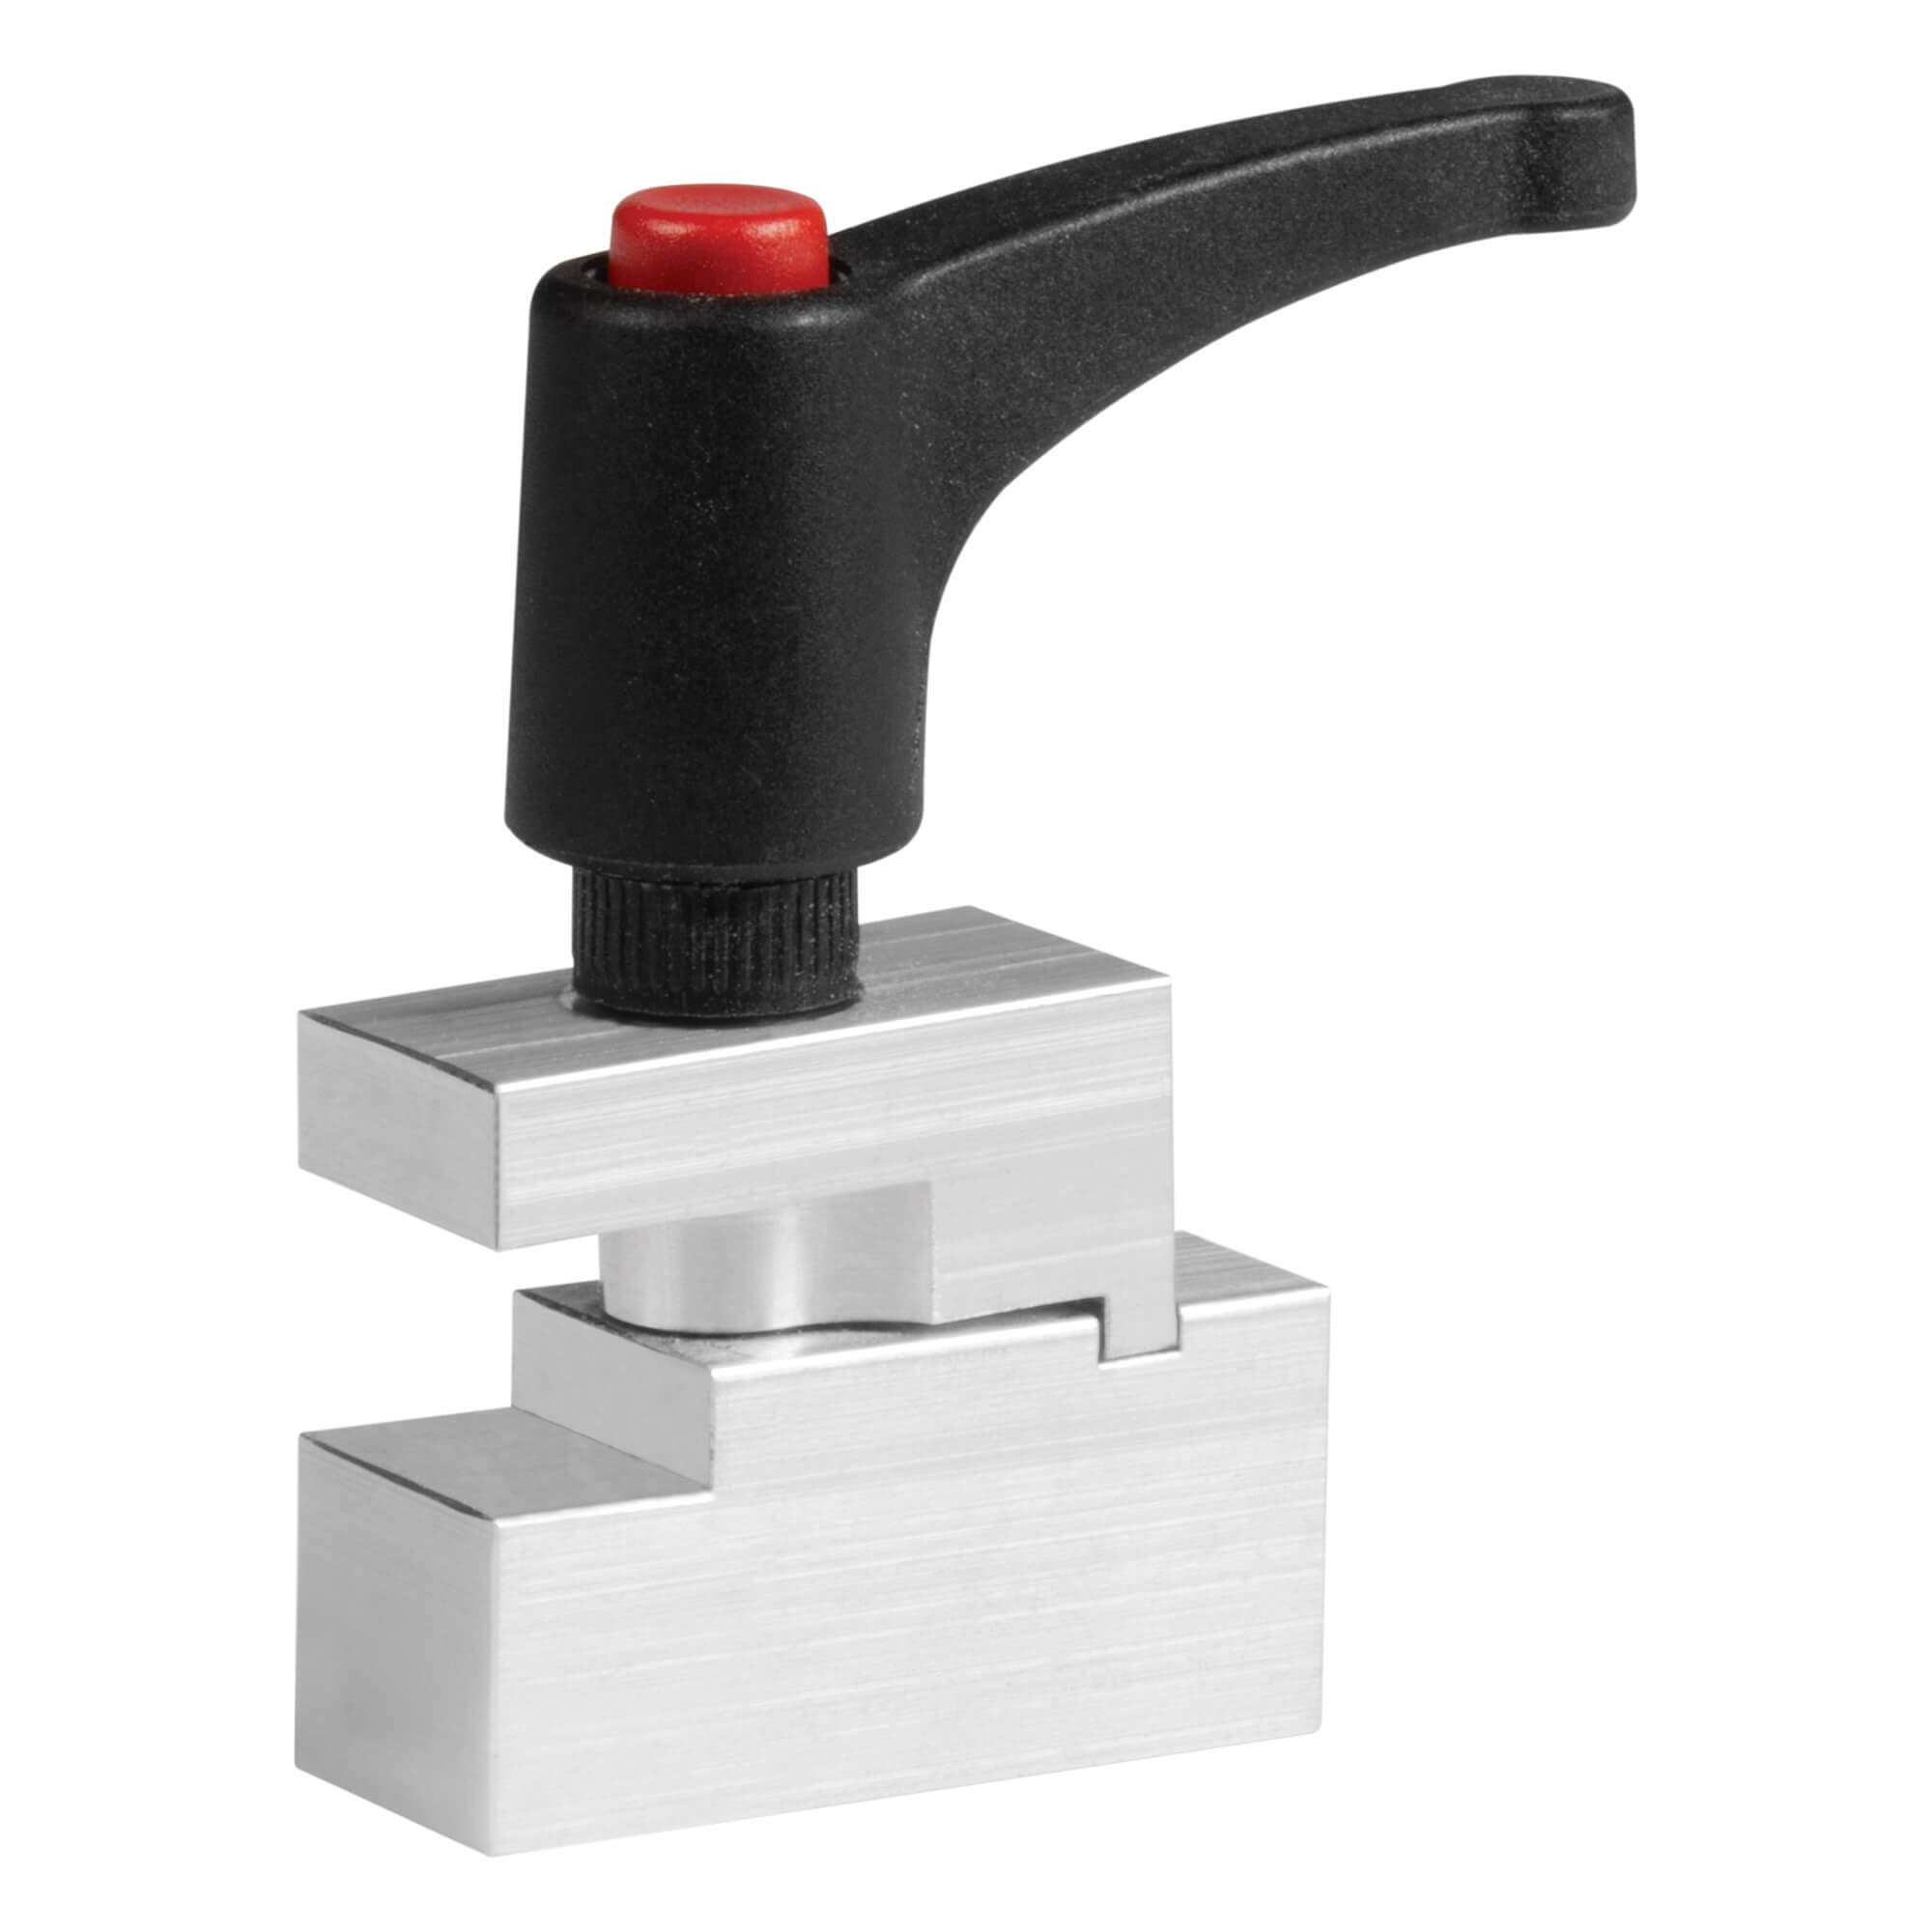 Photo of Trend Worktop True Cut Worktop Jig Out Of Square Accessory